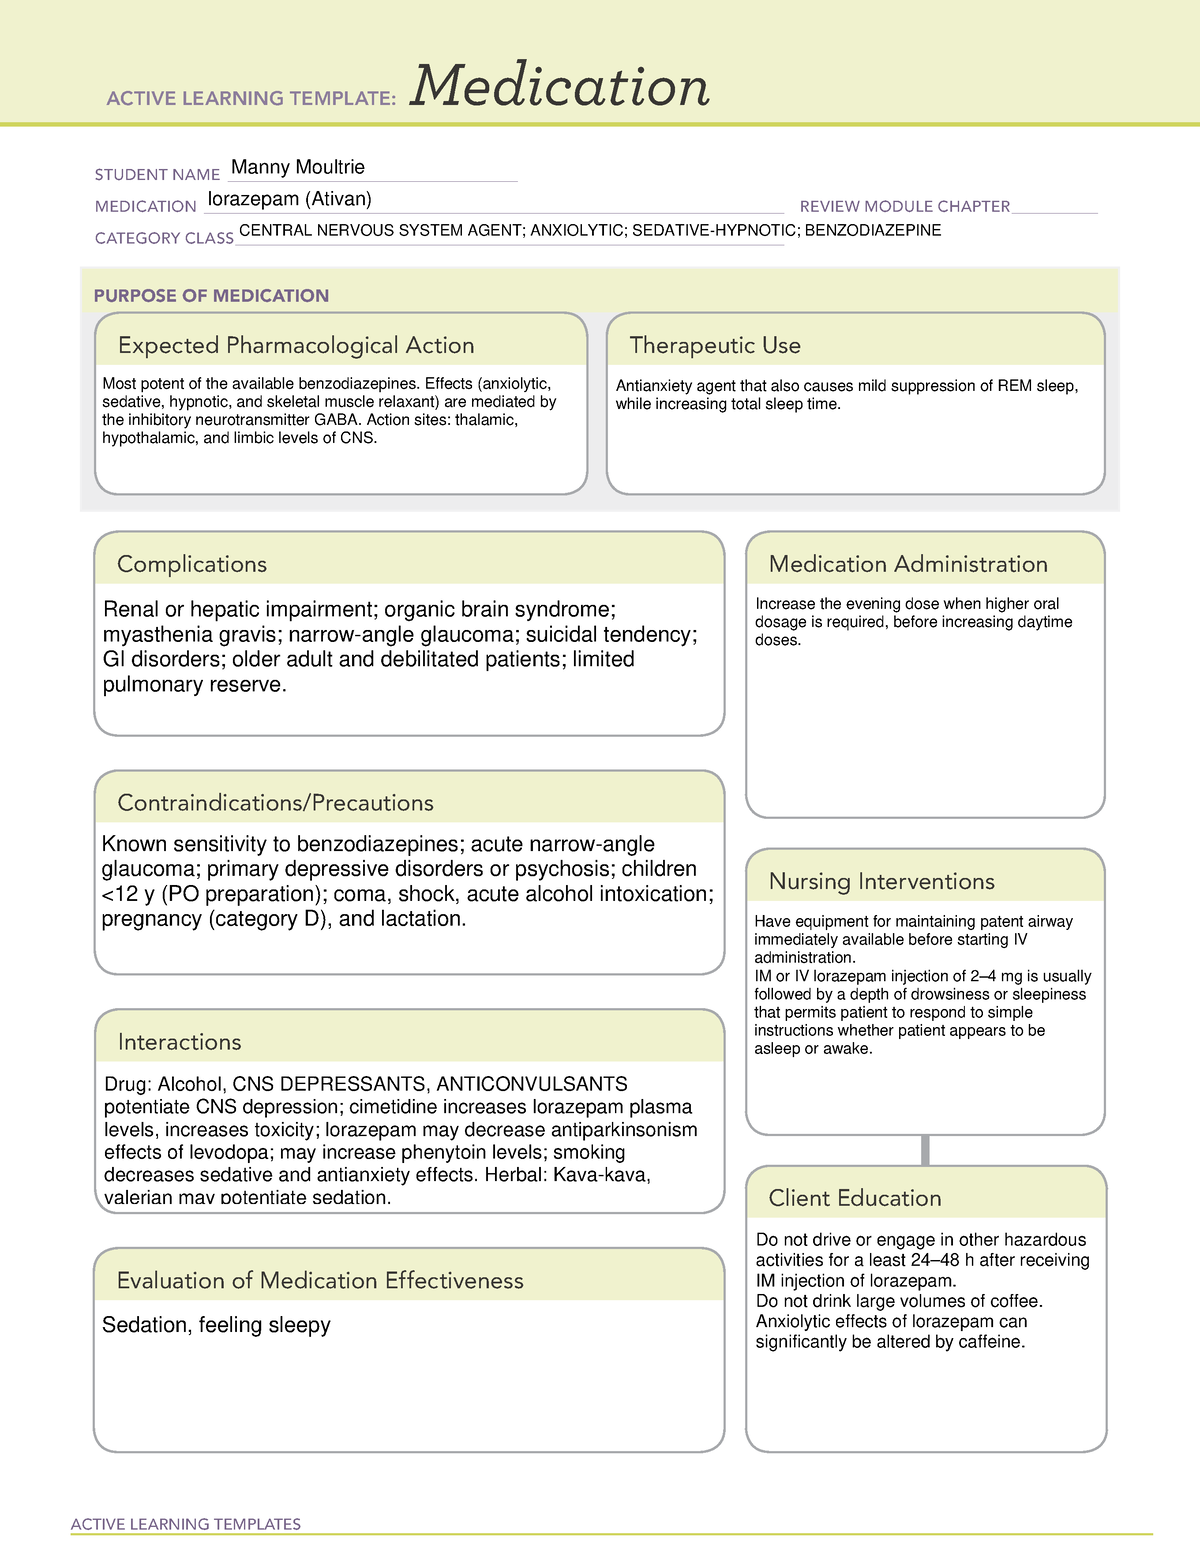 Ativan Medication Template for ATI ACTIVE LEARNING TEMPLATES